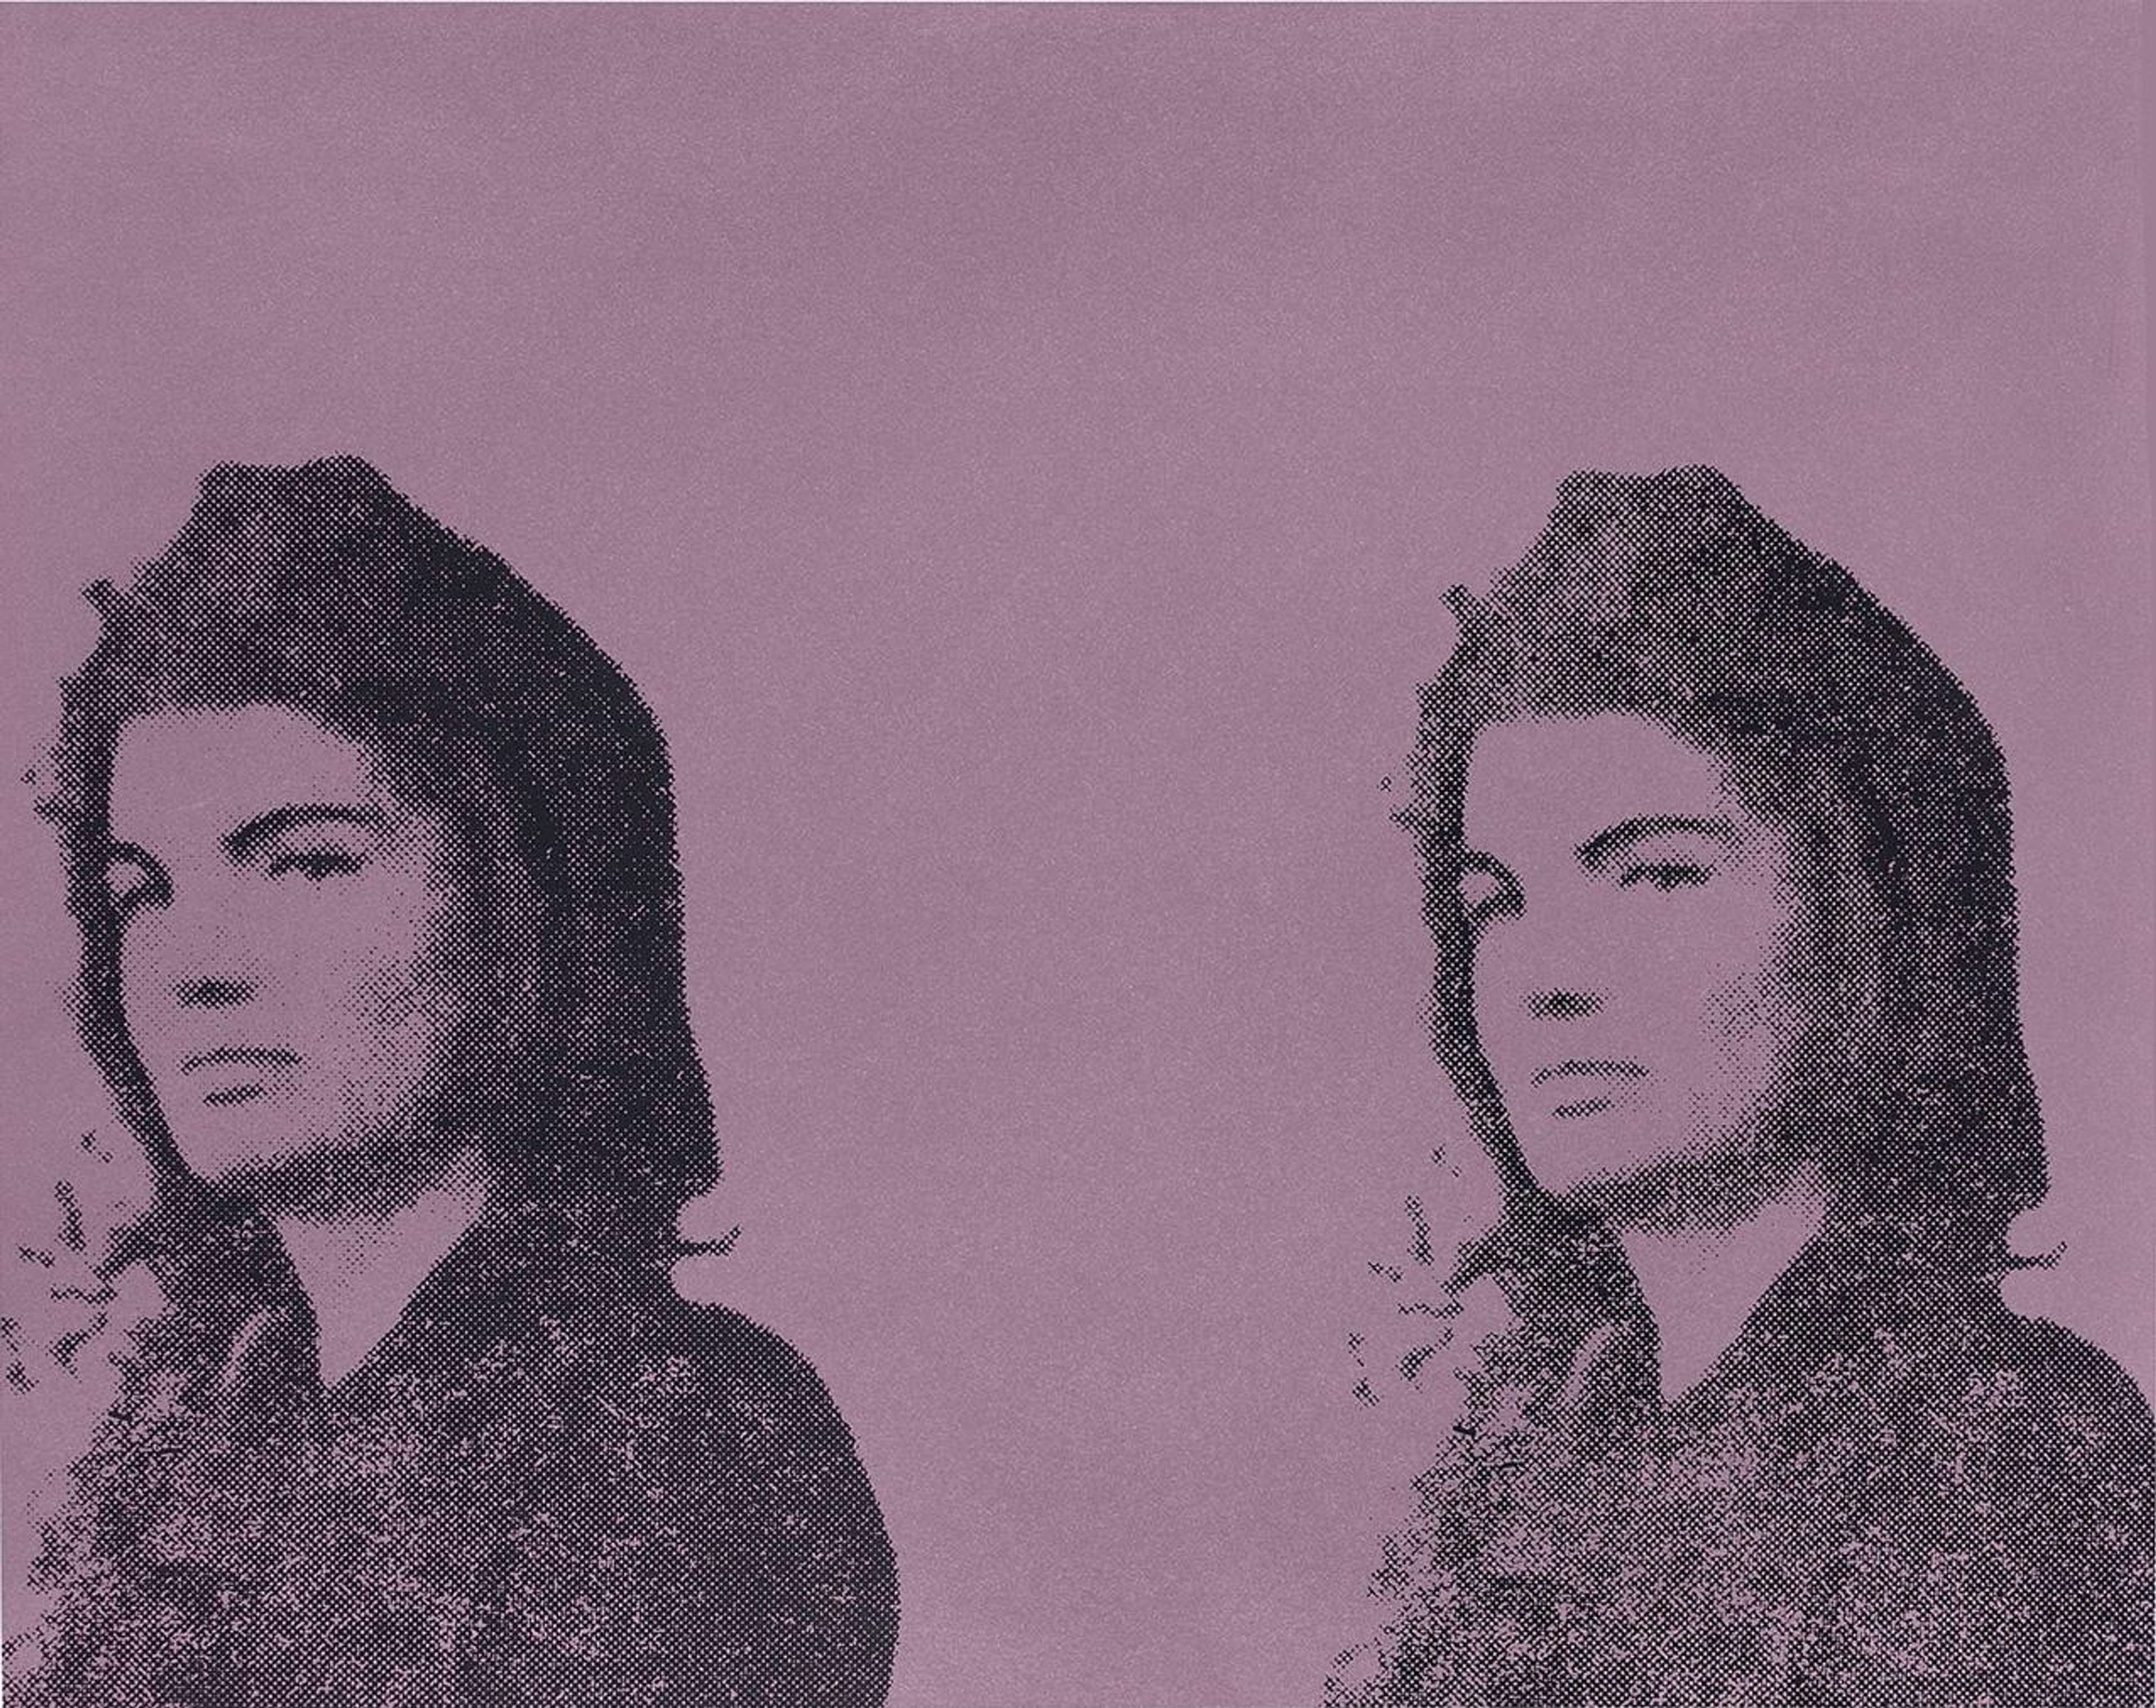 The image shows a doubled press photograph of Jacqueline Kennedy after the assassination of her husband, President John F. Kennedy. Left largely untouched by the artist, the image is rendered in black and purple, maintaining a grainy quality, like that of the original newspaper image.